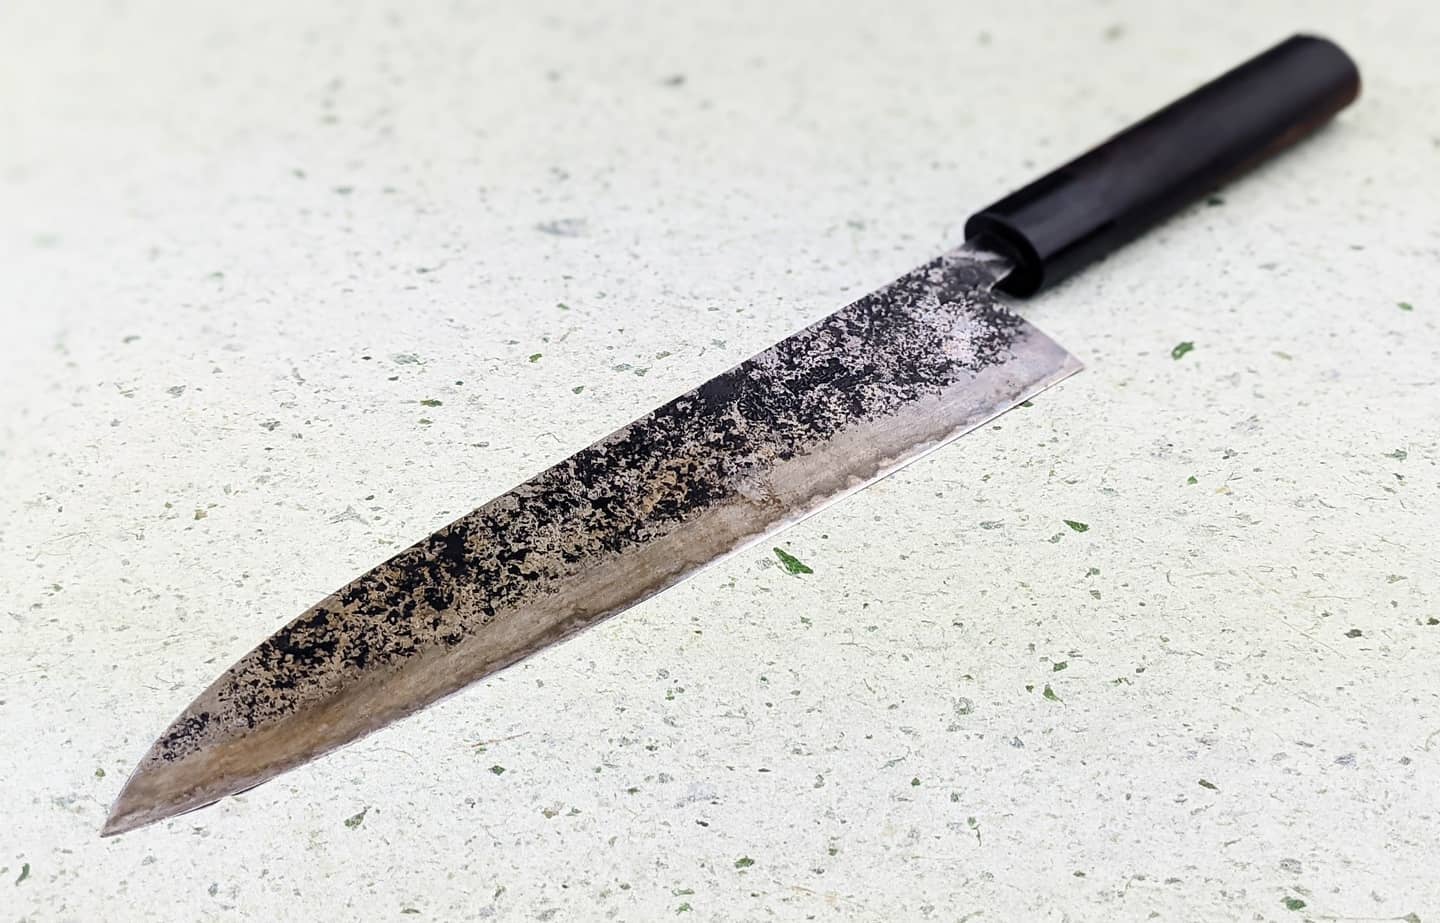 How to Care For Your Knives So They Last Long and Stay Sharp